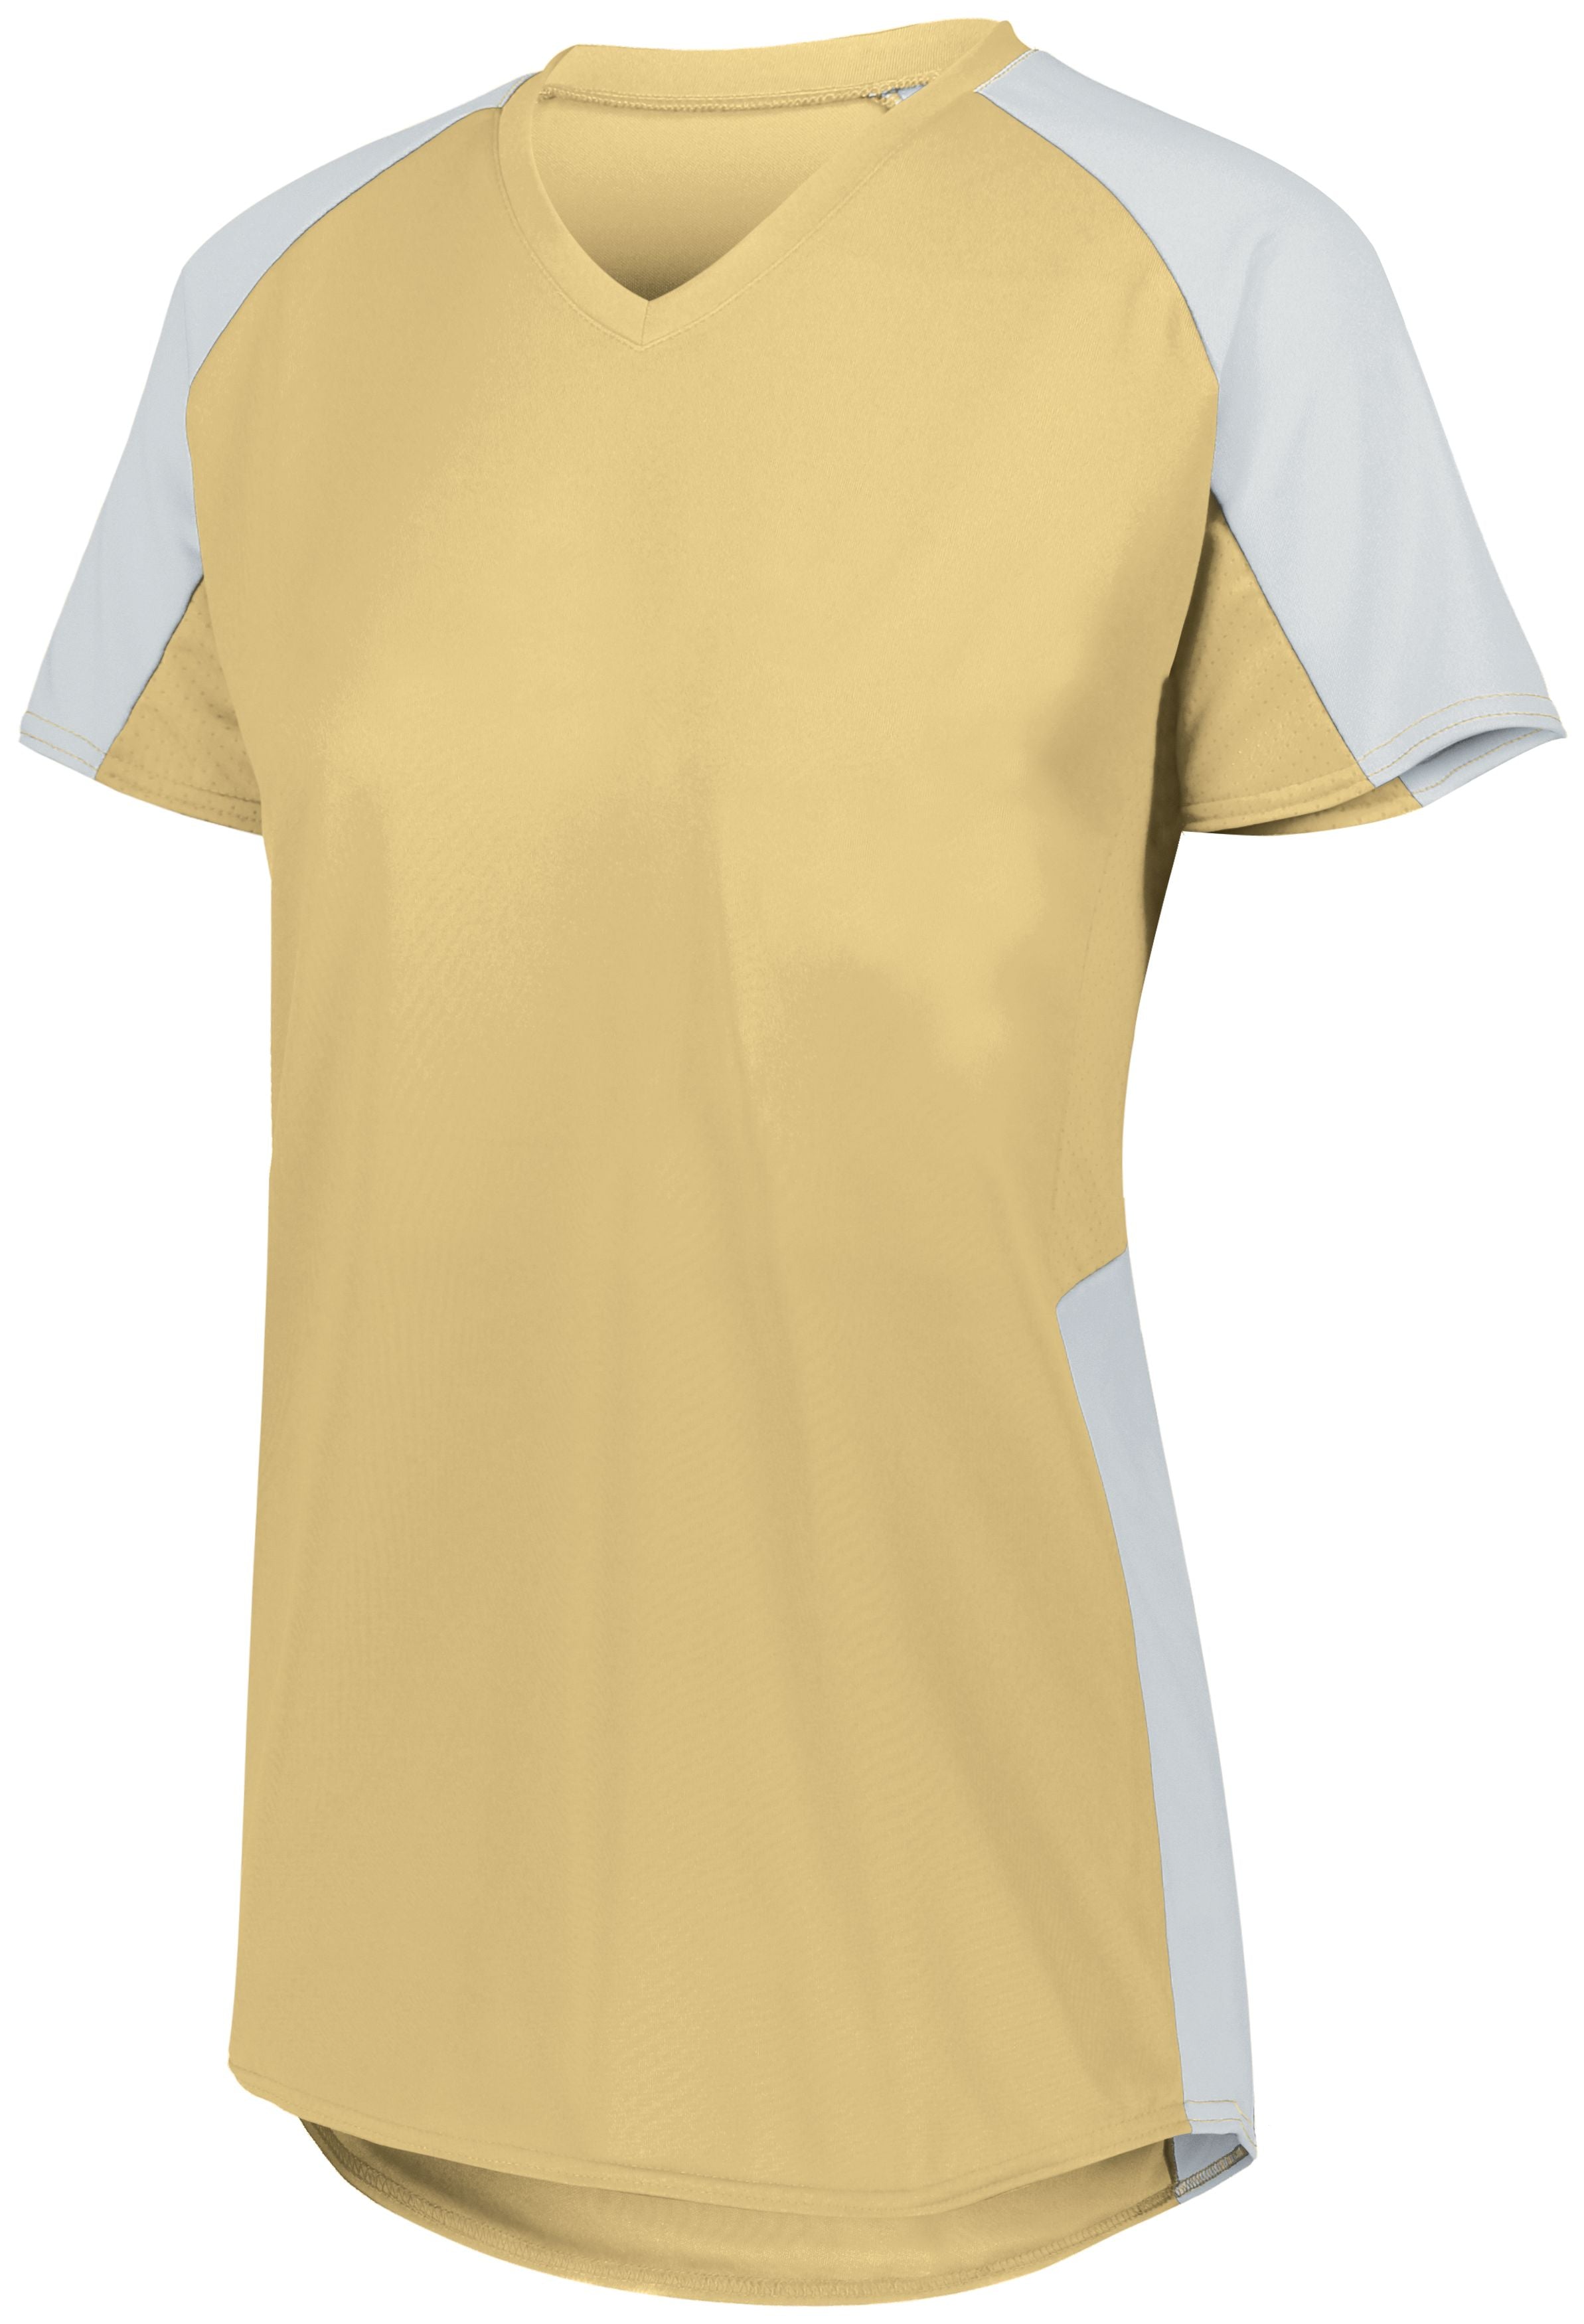 Augusta Sportswear Ladies Cutter Jersey in Vegas Gold/White  -Part of the Ladies, Ladies-Jersey, Augusta-Products, Softball, Shirts product lines at KanaleyCreations.com